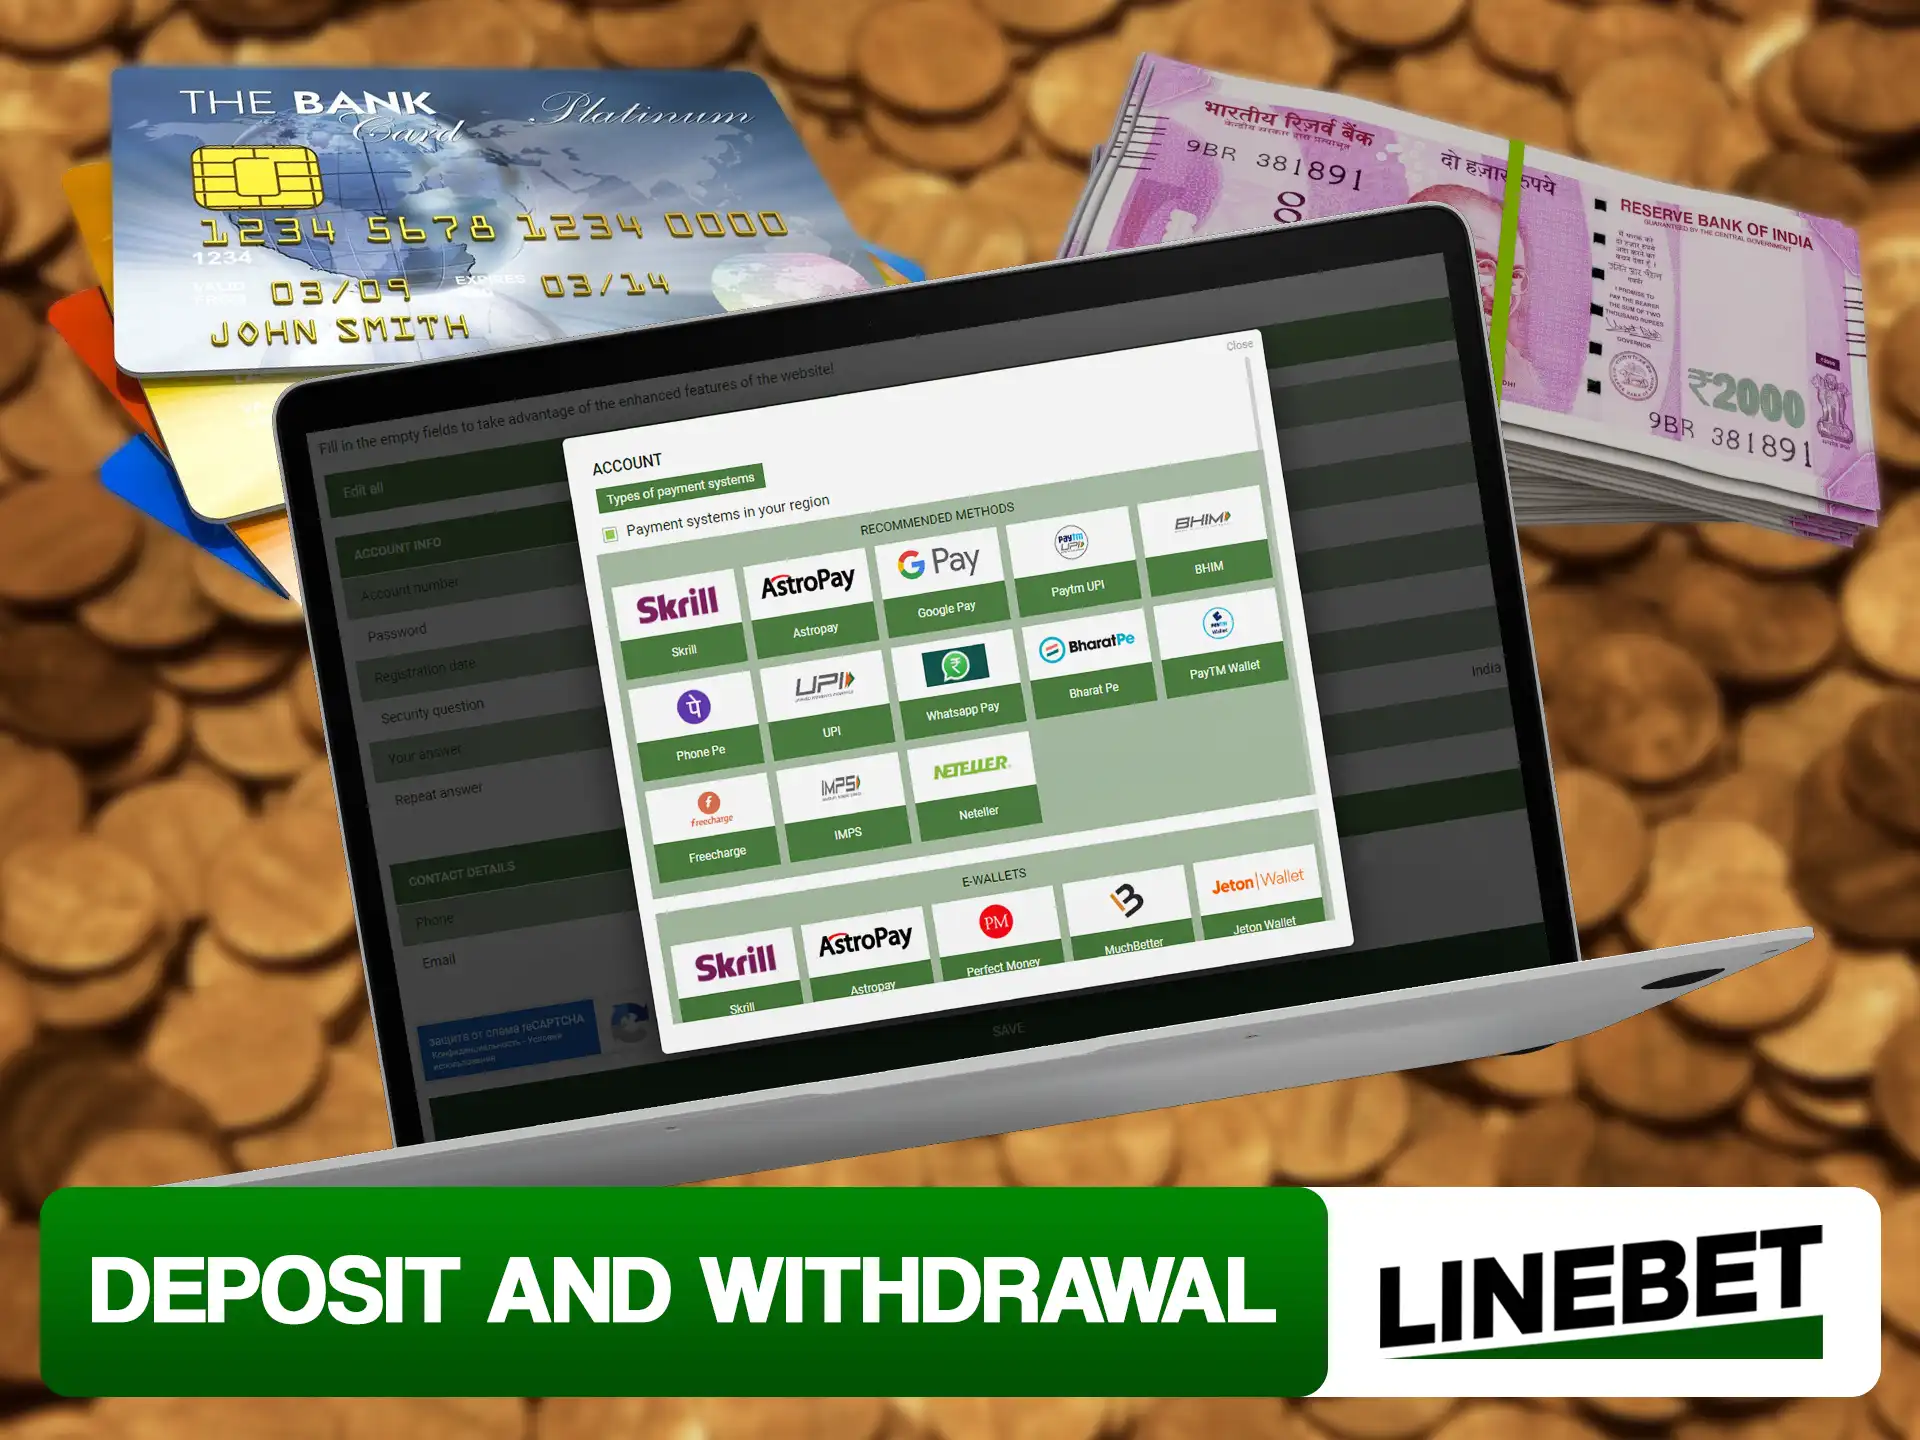 Deposit and withdraw money from Linebet without problems.